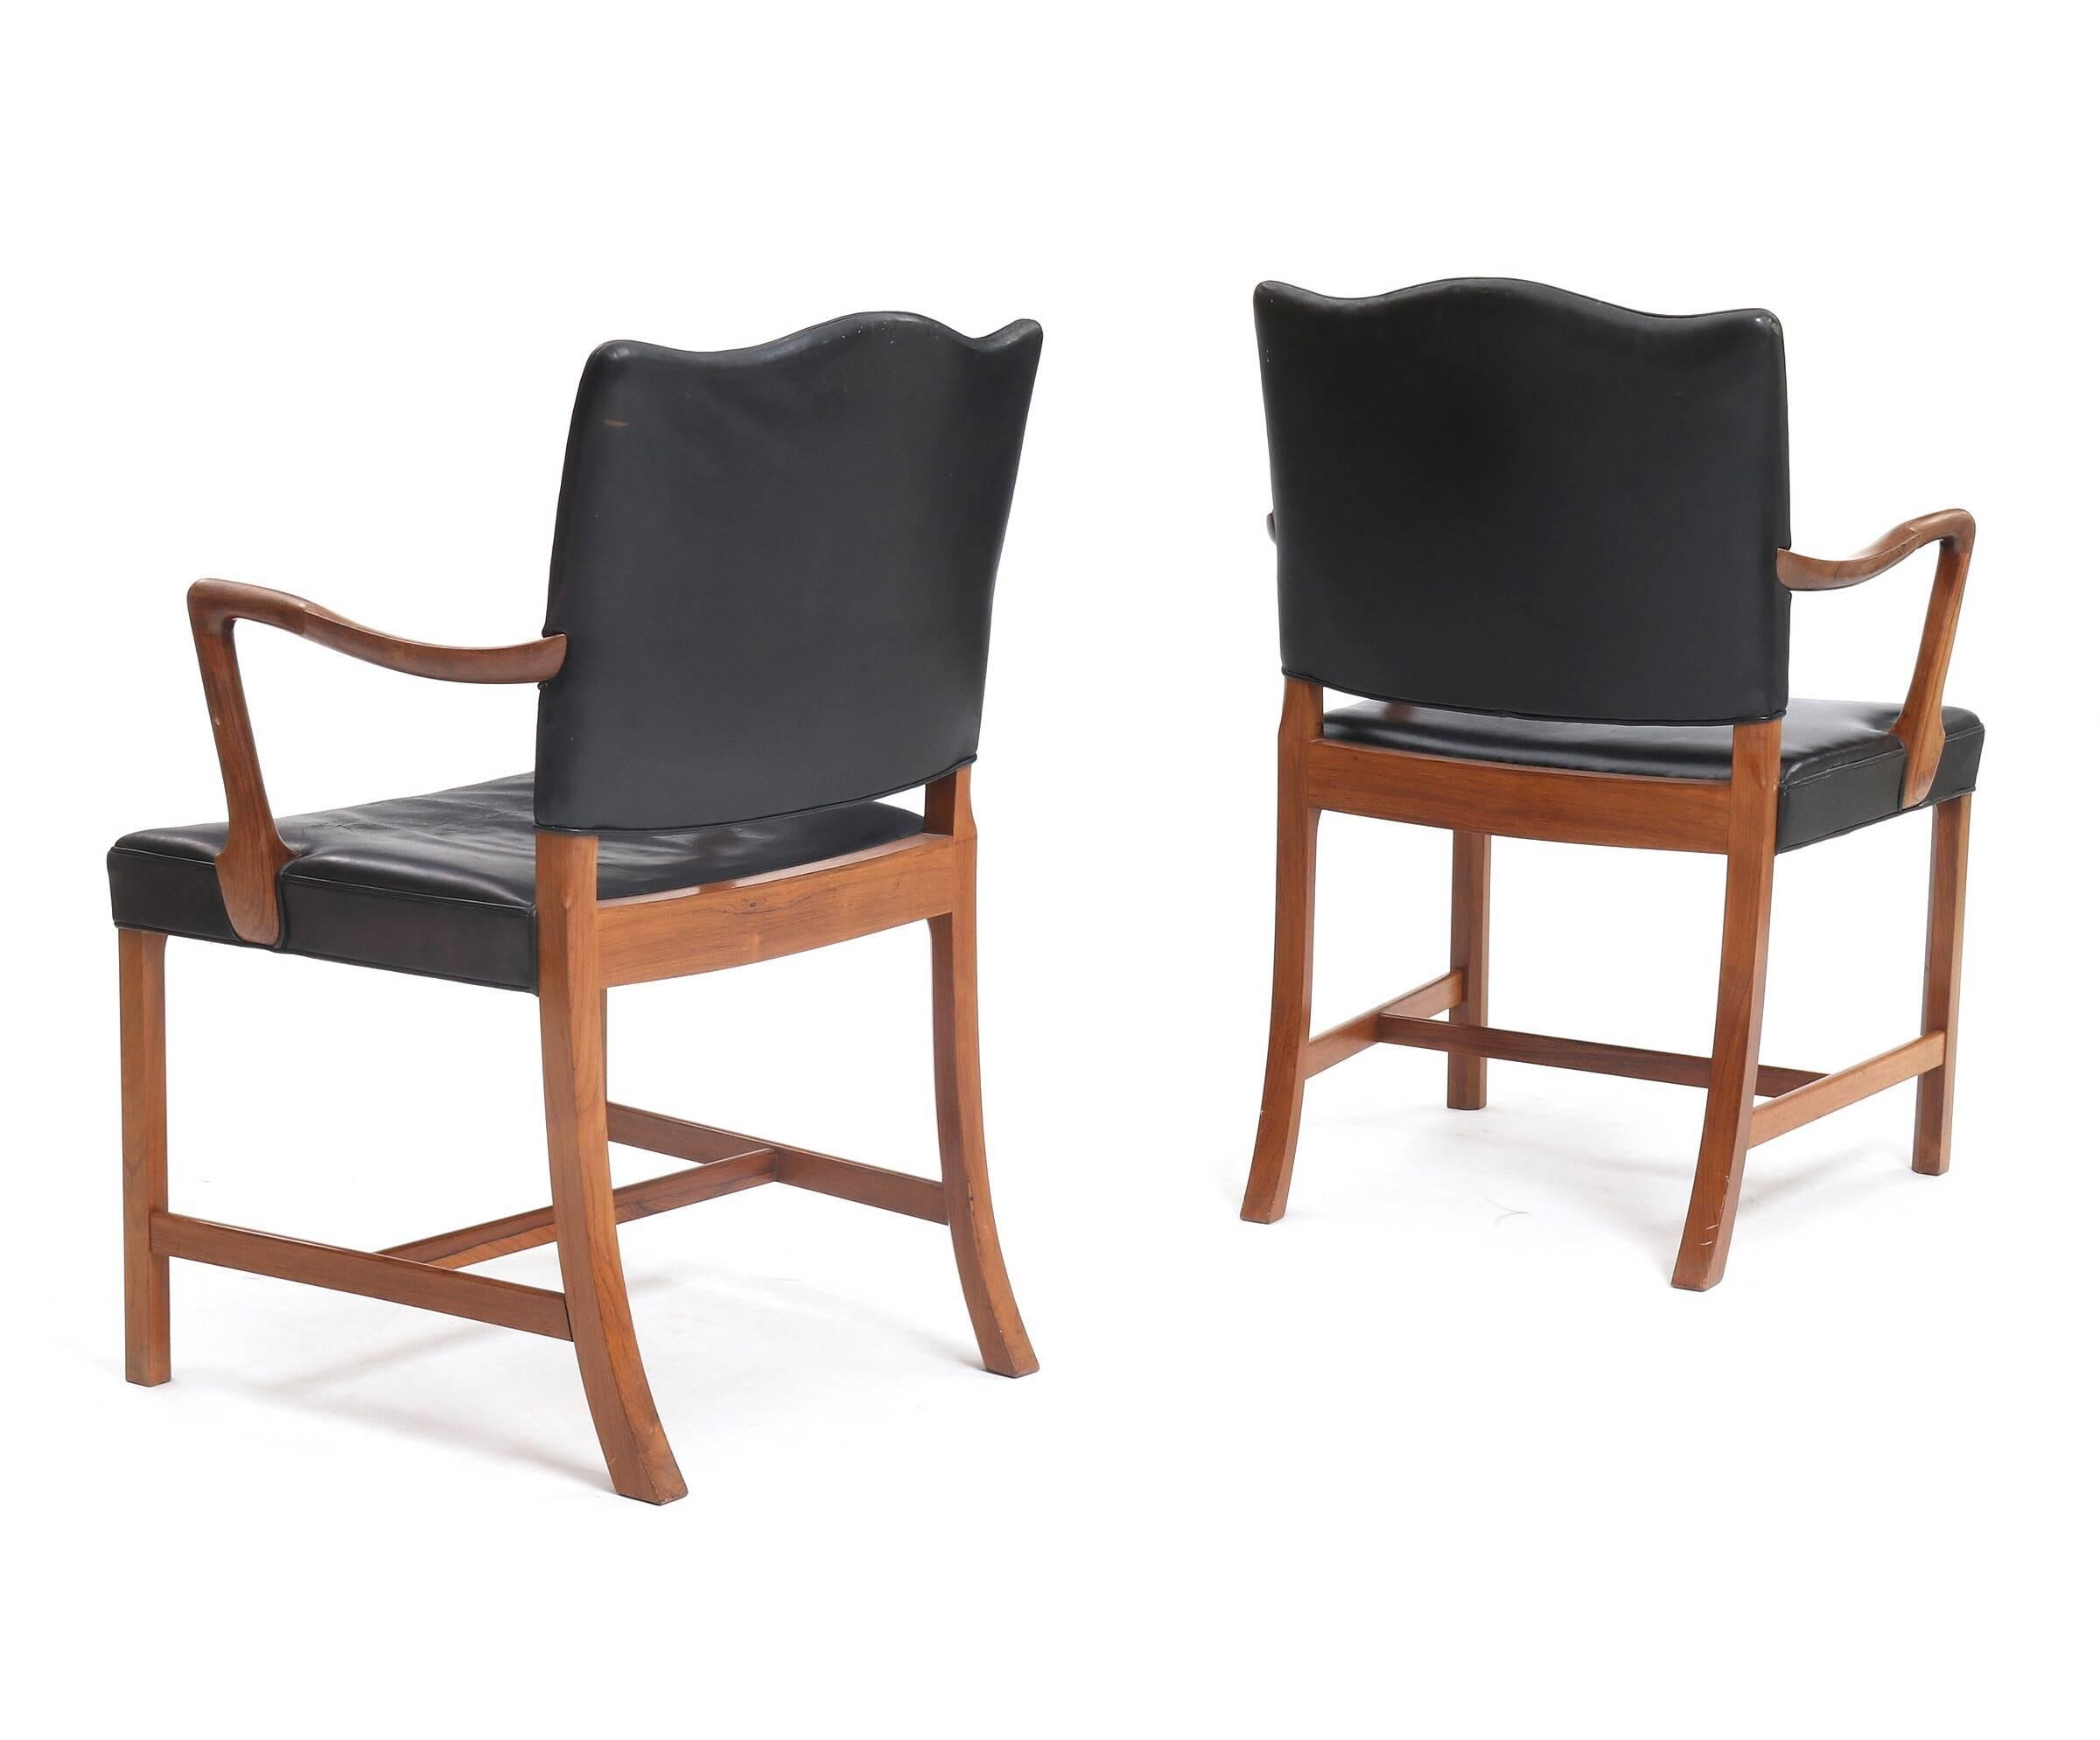 A fine pair of rosewood armchairs, seat and back upholstered with original black leather. Made and marked with label by cabinetmaker A.J. Iversen, circa 1960s. Exceptionally good condition. Proper chairs made by a cabinetmaker - each chair made one